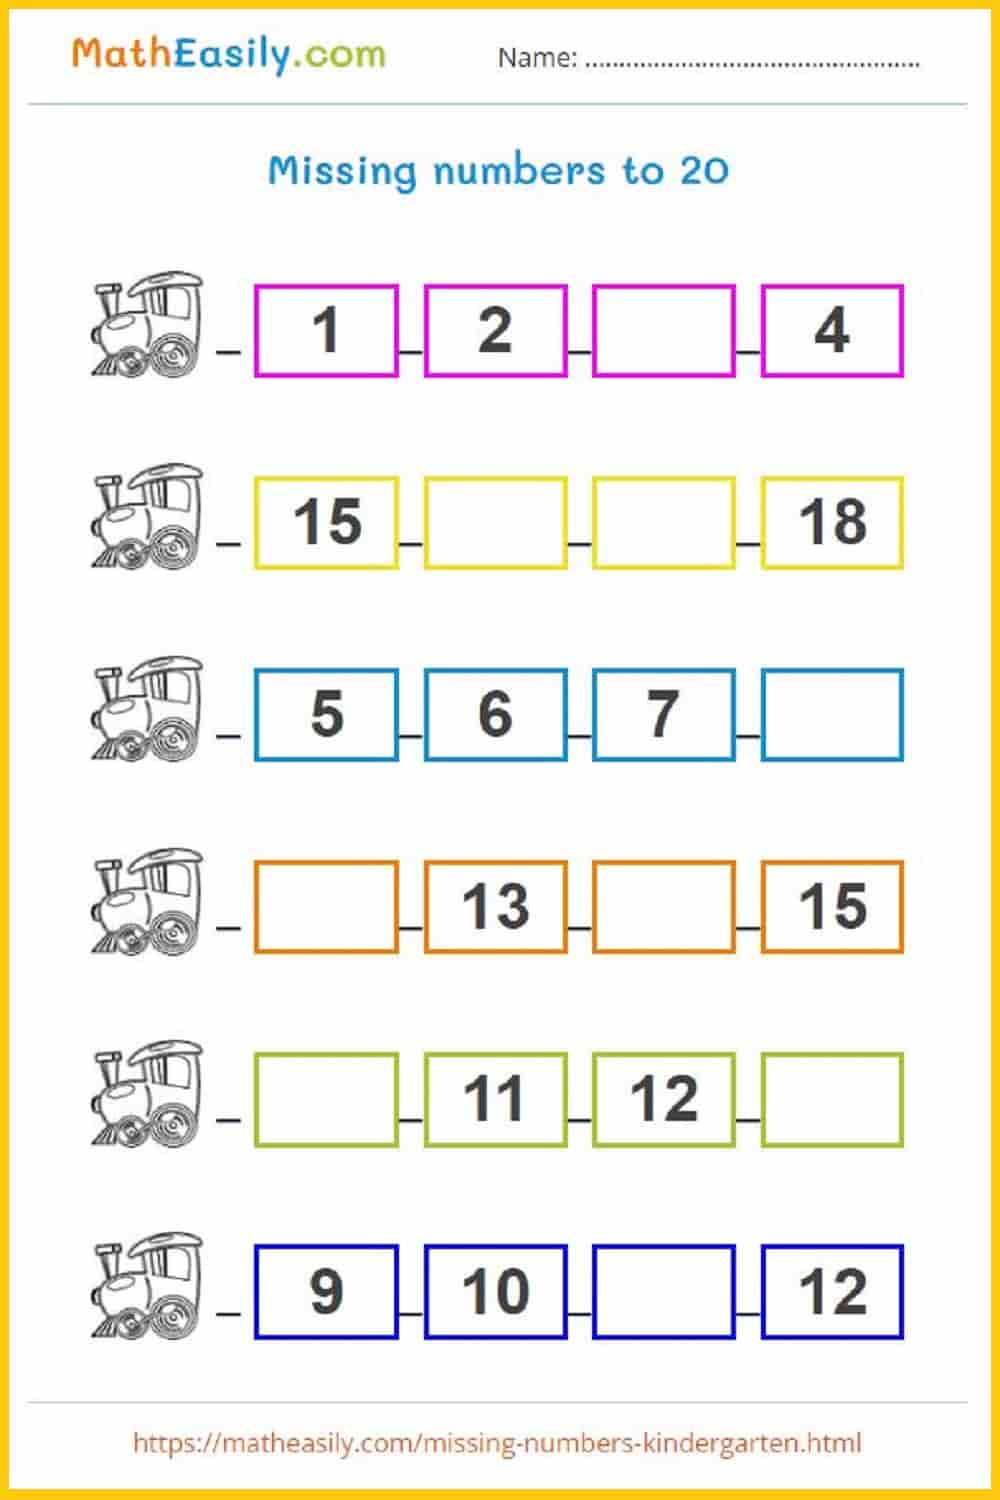 Free 1st grade math worksheets for year 1 worksheets maths.
free printable math worksheets for 1st grade. 1st class maths worksheets. math worksheets for 1st graders